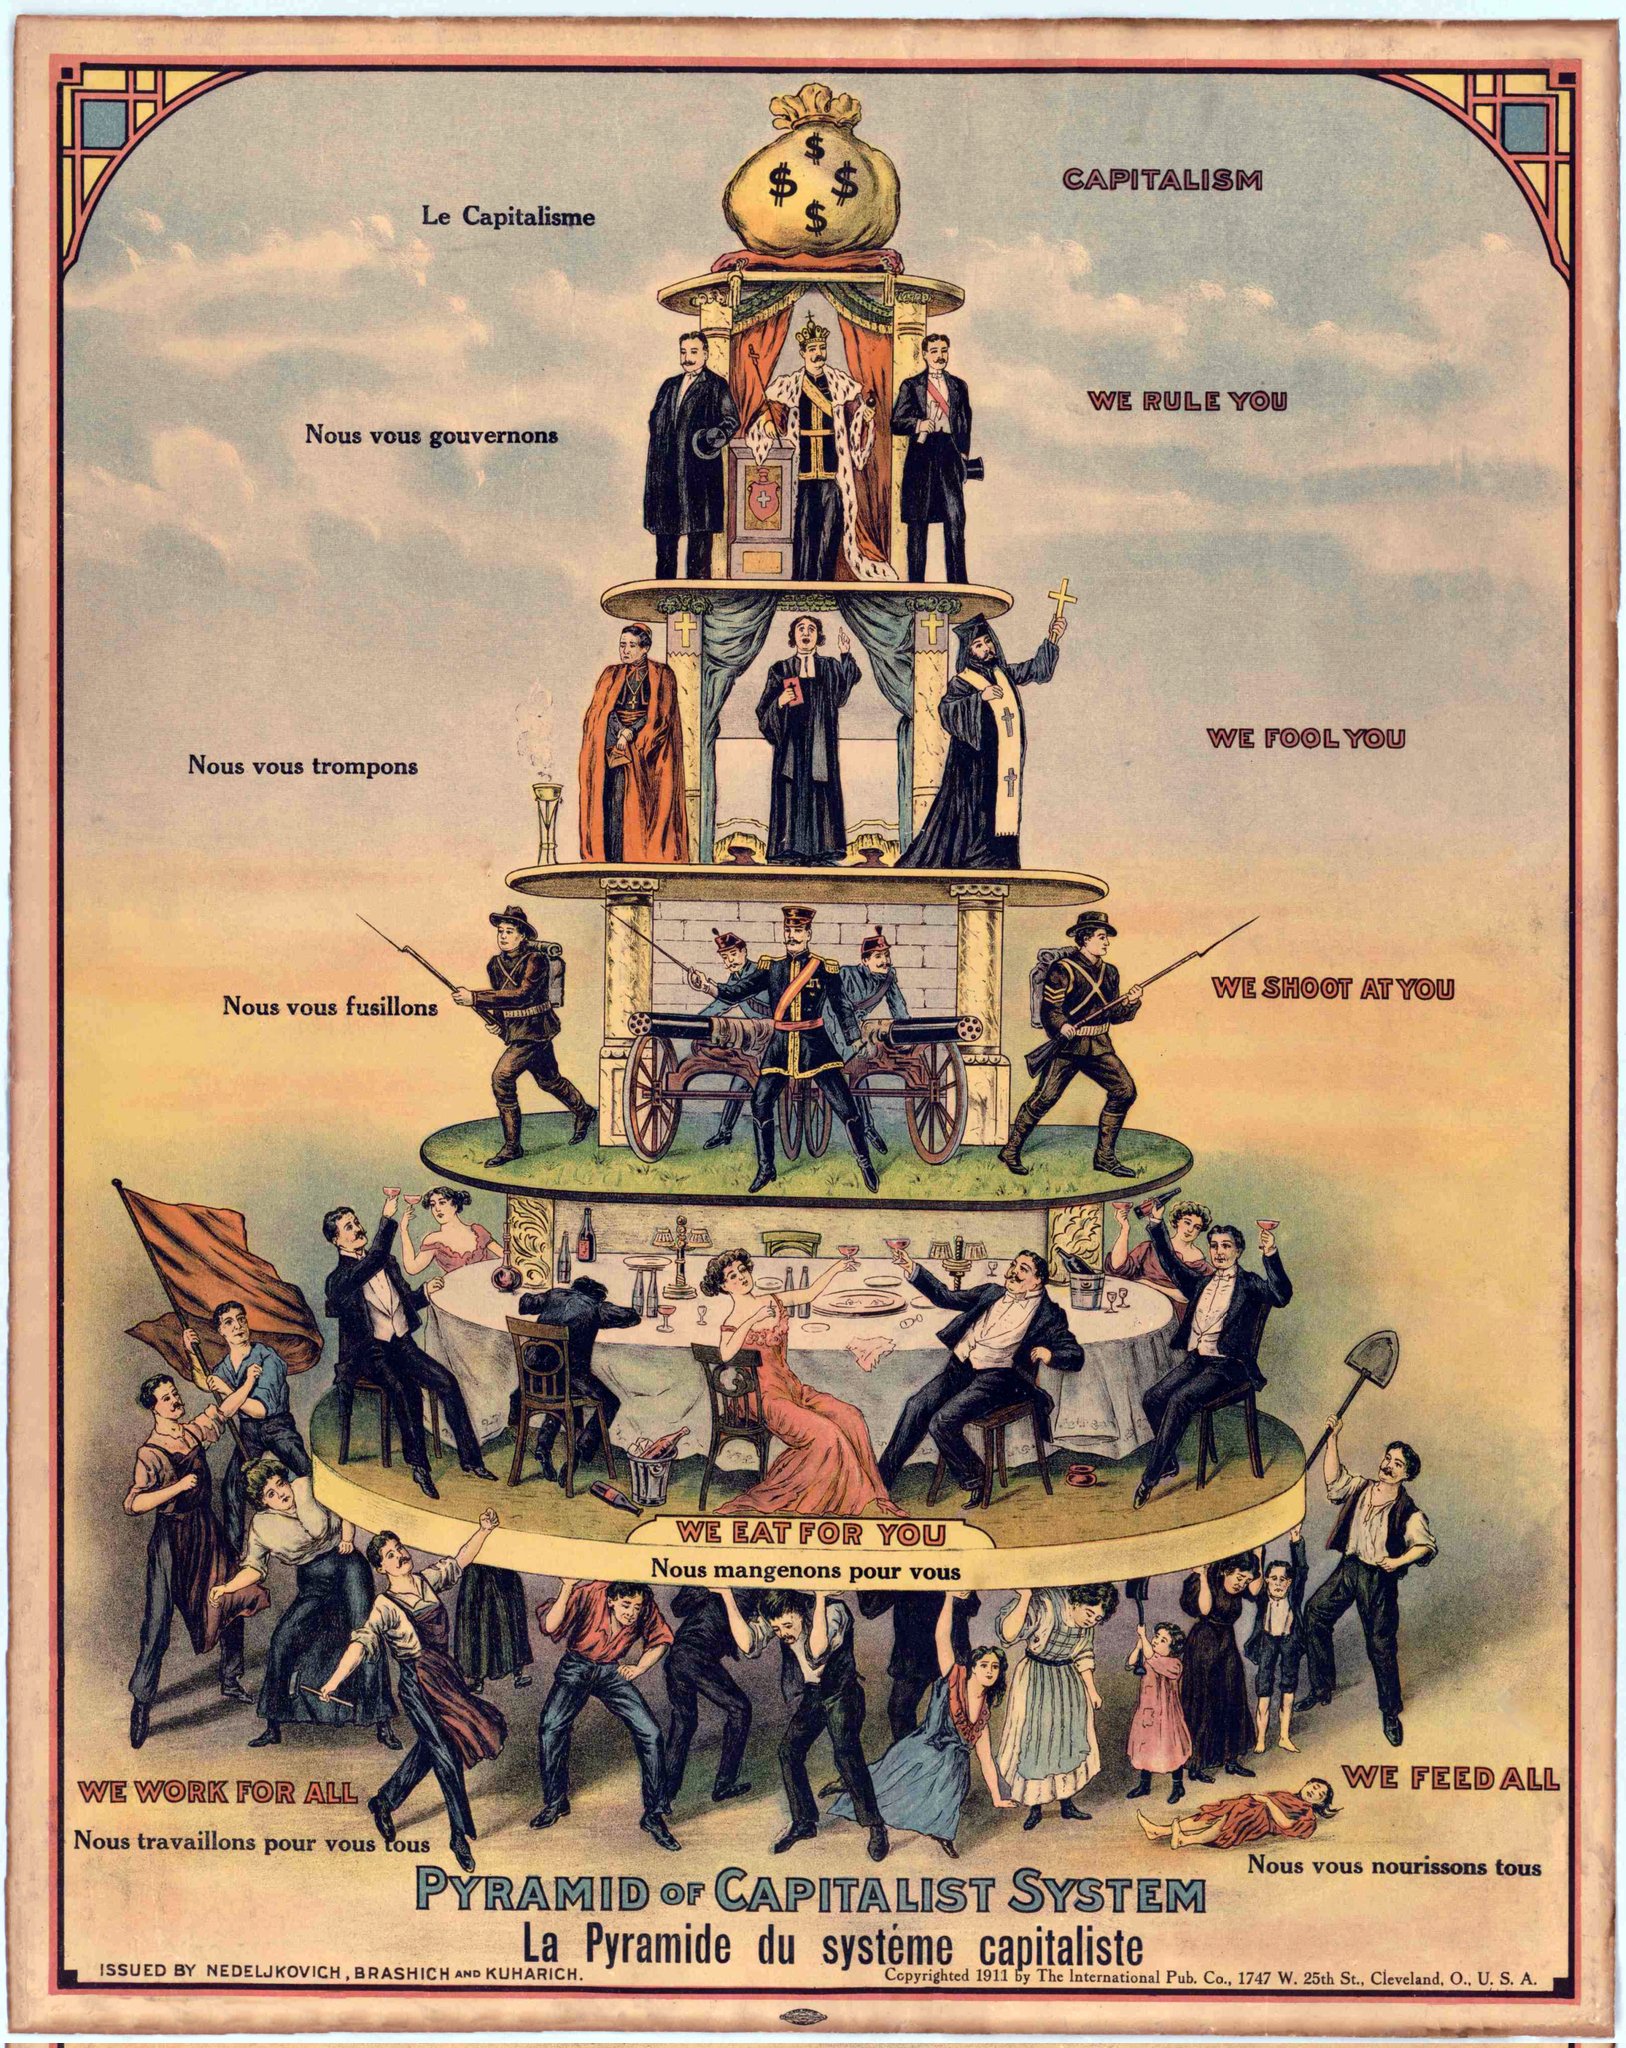 Capitalist System pyramid image, people in tiers like layers of a cake, the many workers support the base, the rich and rulers at the top